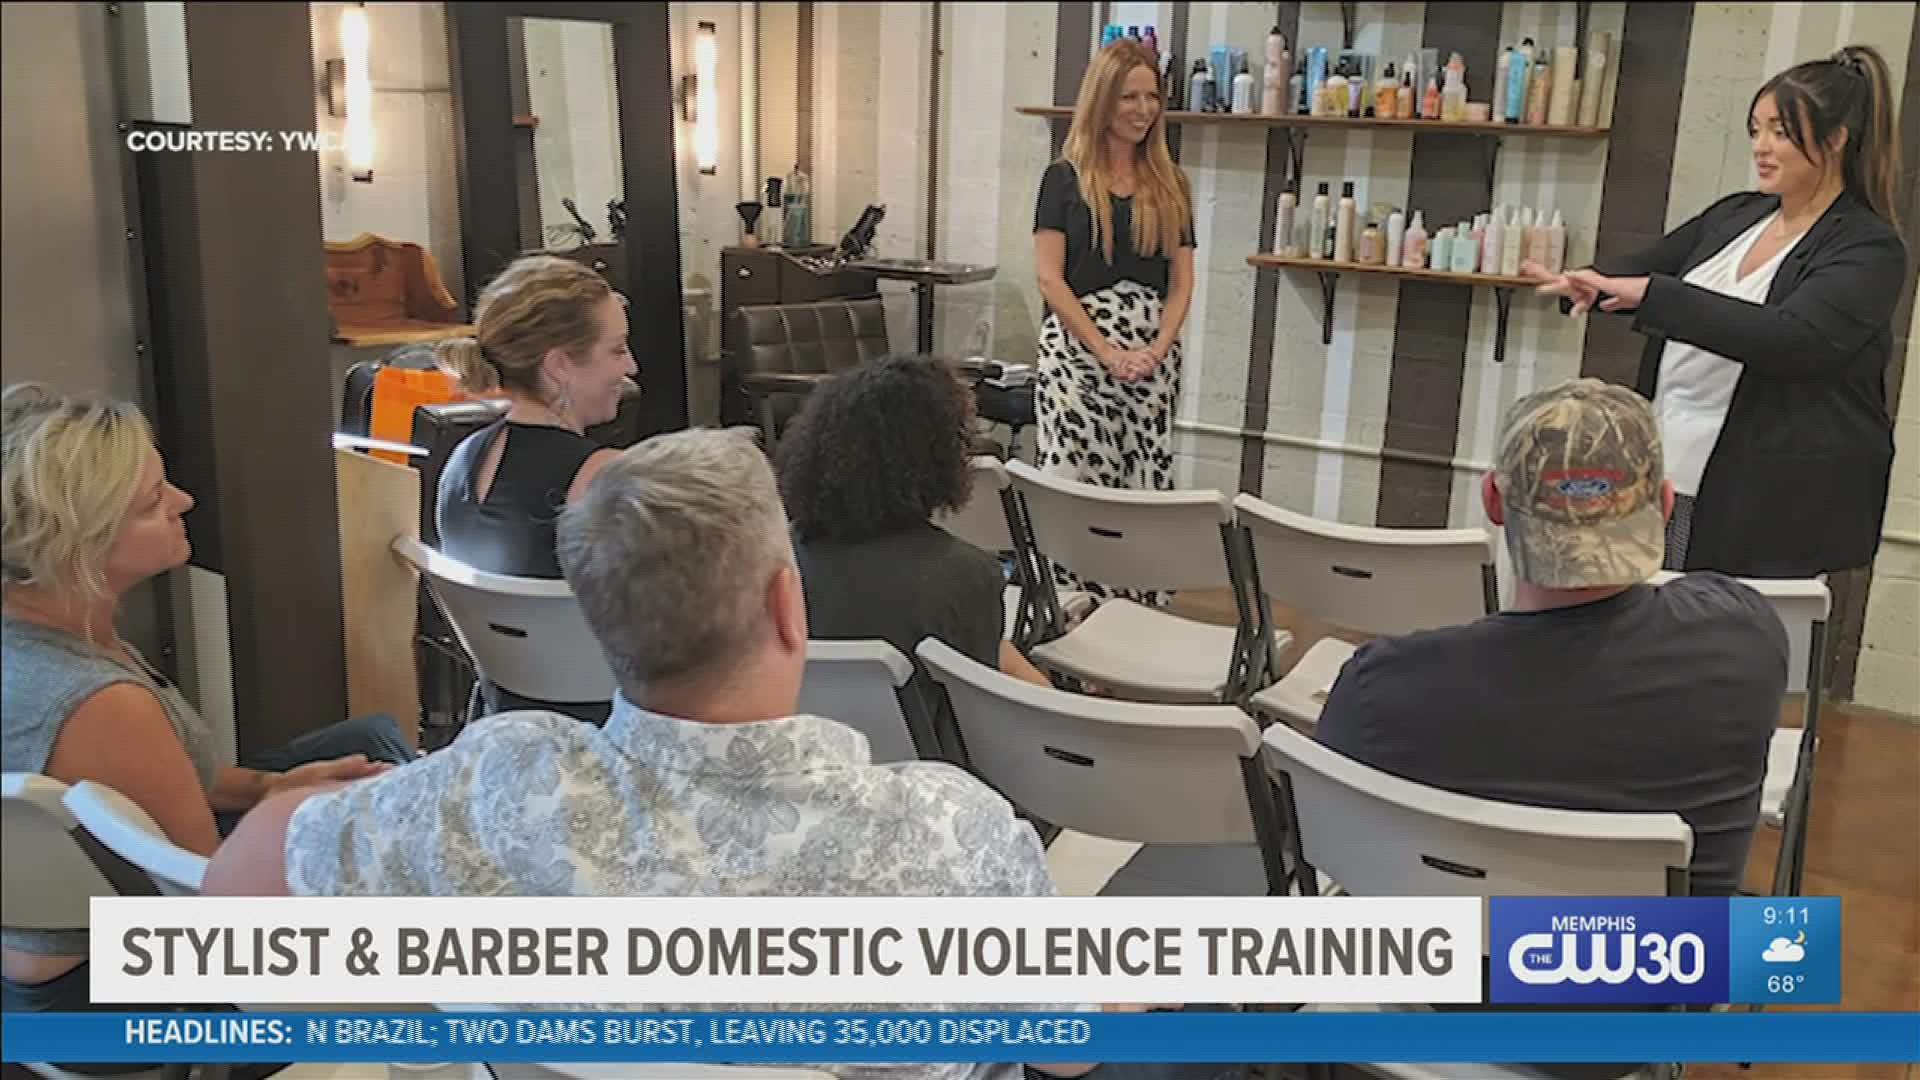 Starting January 1, 2022, a new law will require licensed Tennessee cosmetologists and barbers to take an anti-domestic violence training course.